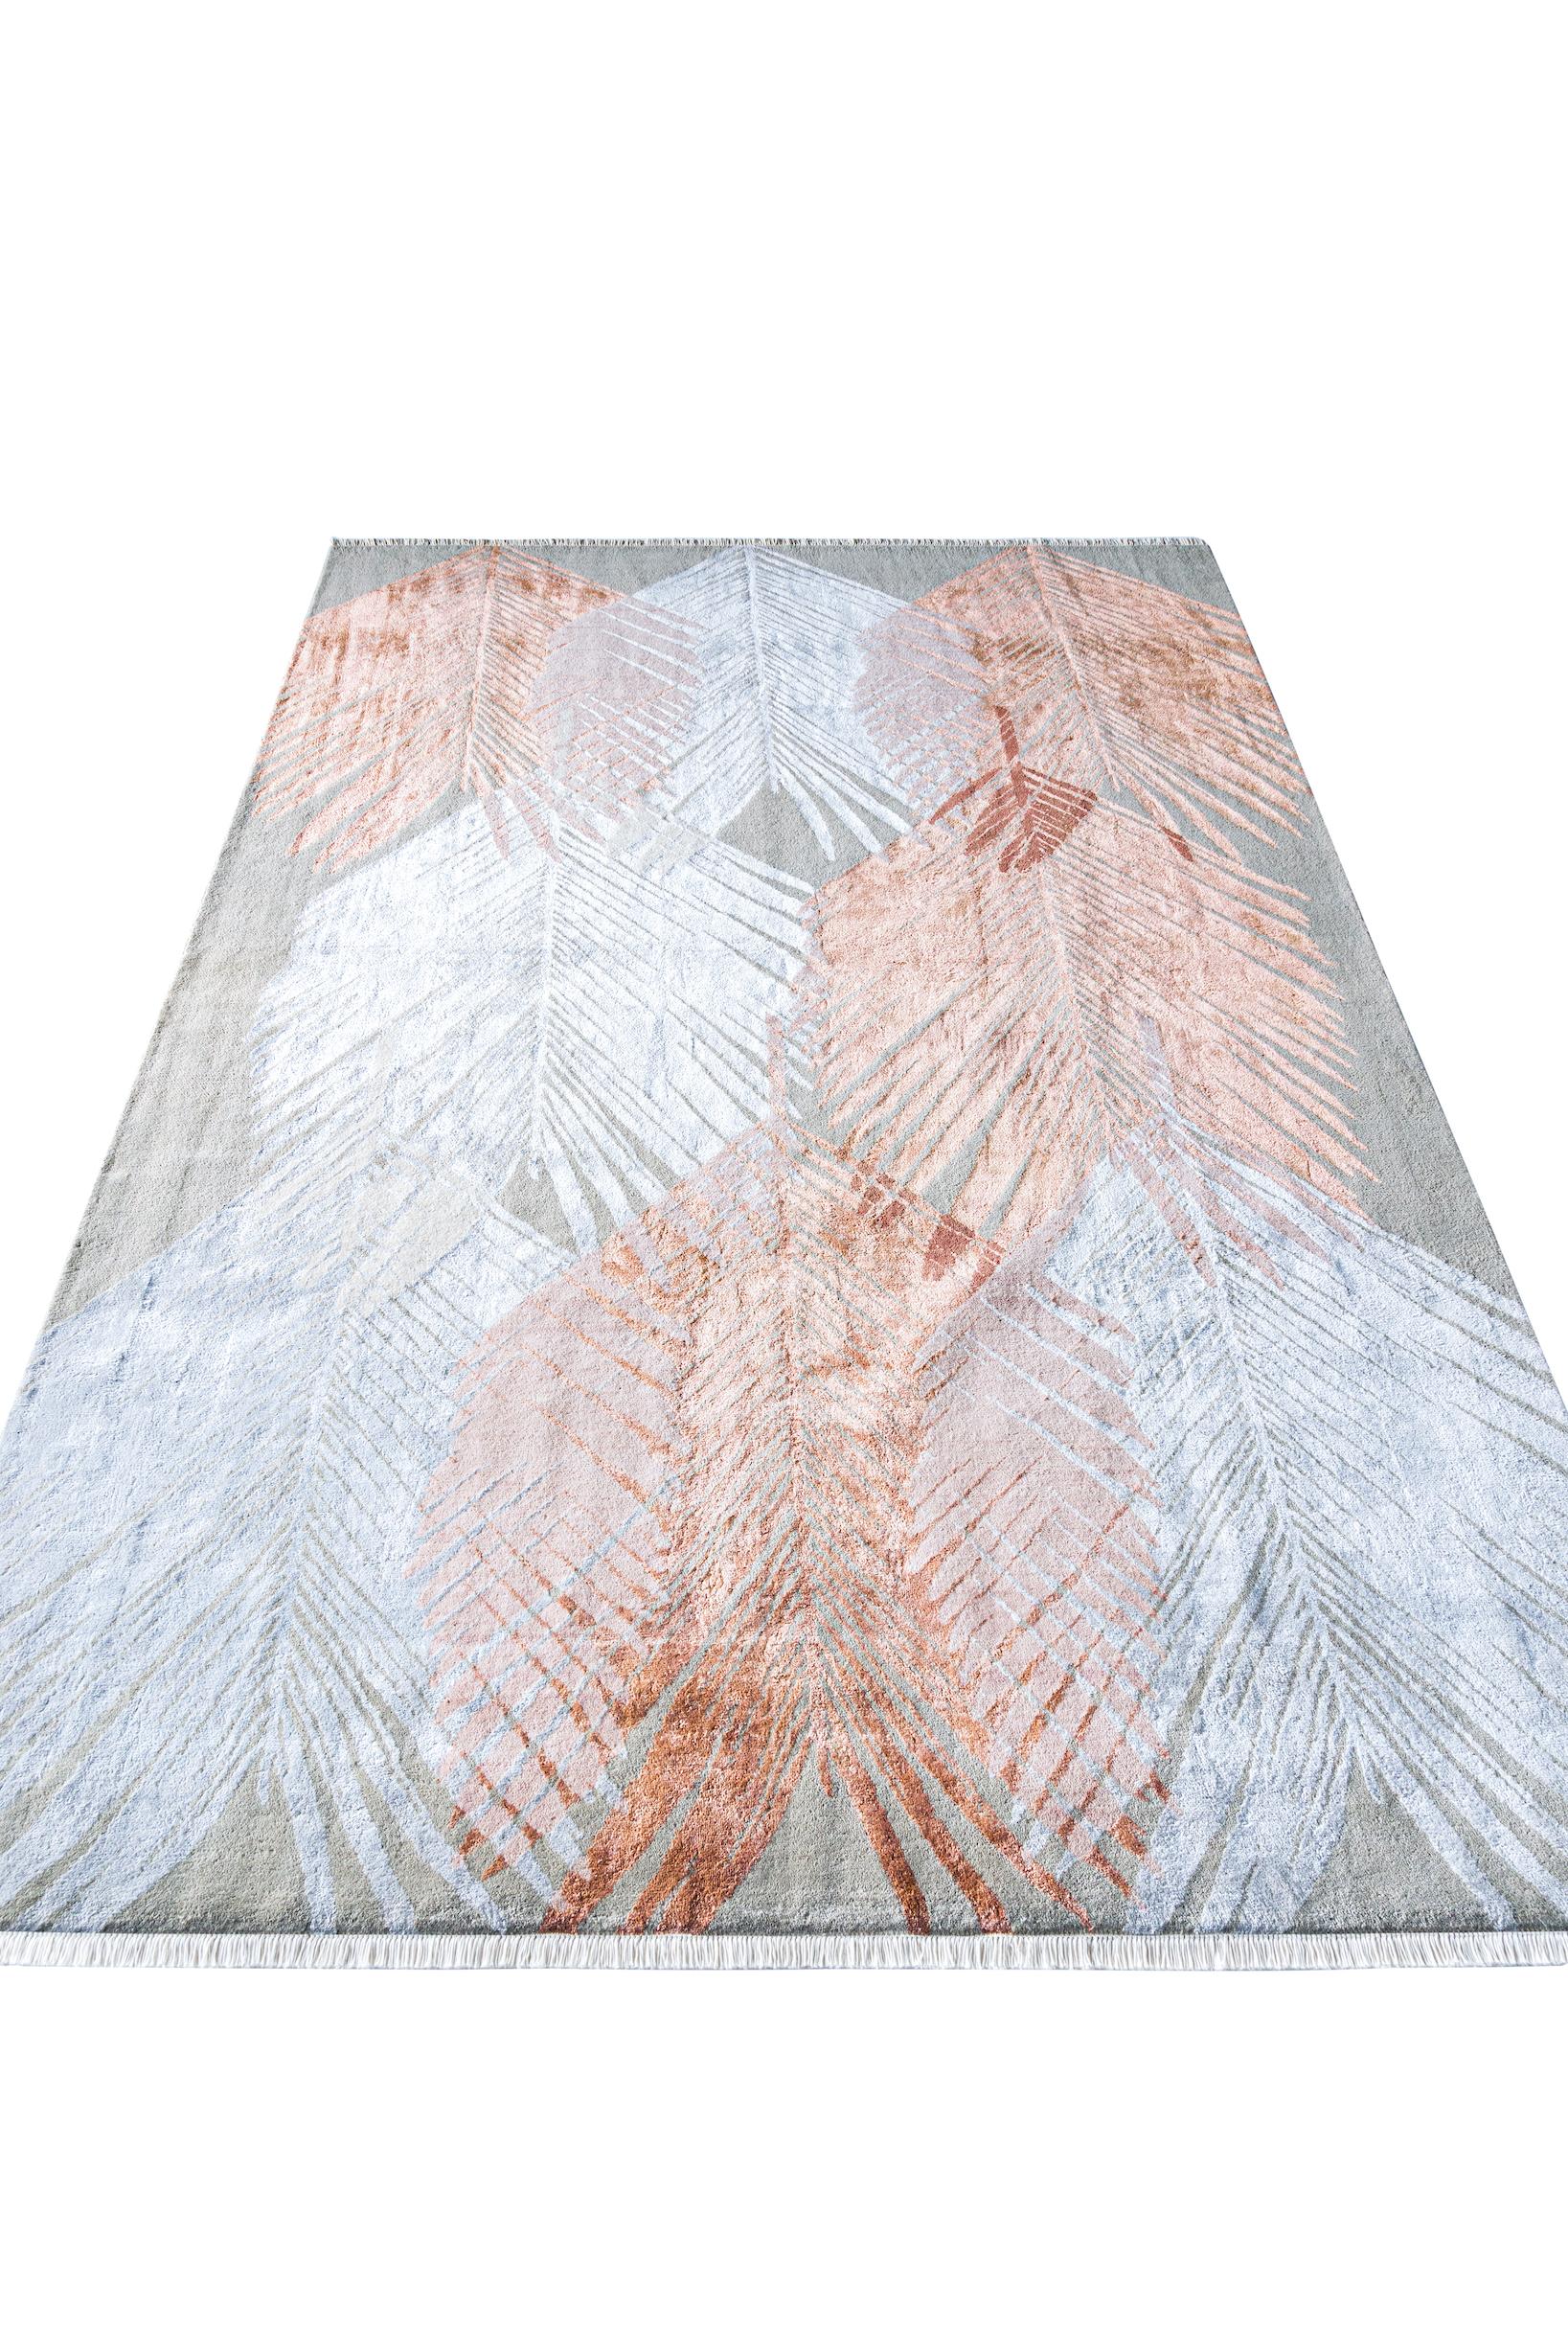 Art Deco Kahhal Looms Cycas Hand-Knotted 300x200cm Rug by JAM BY HEDAYAT For Sale